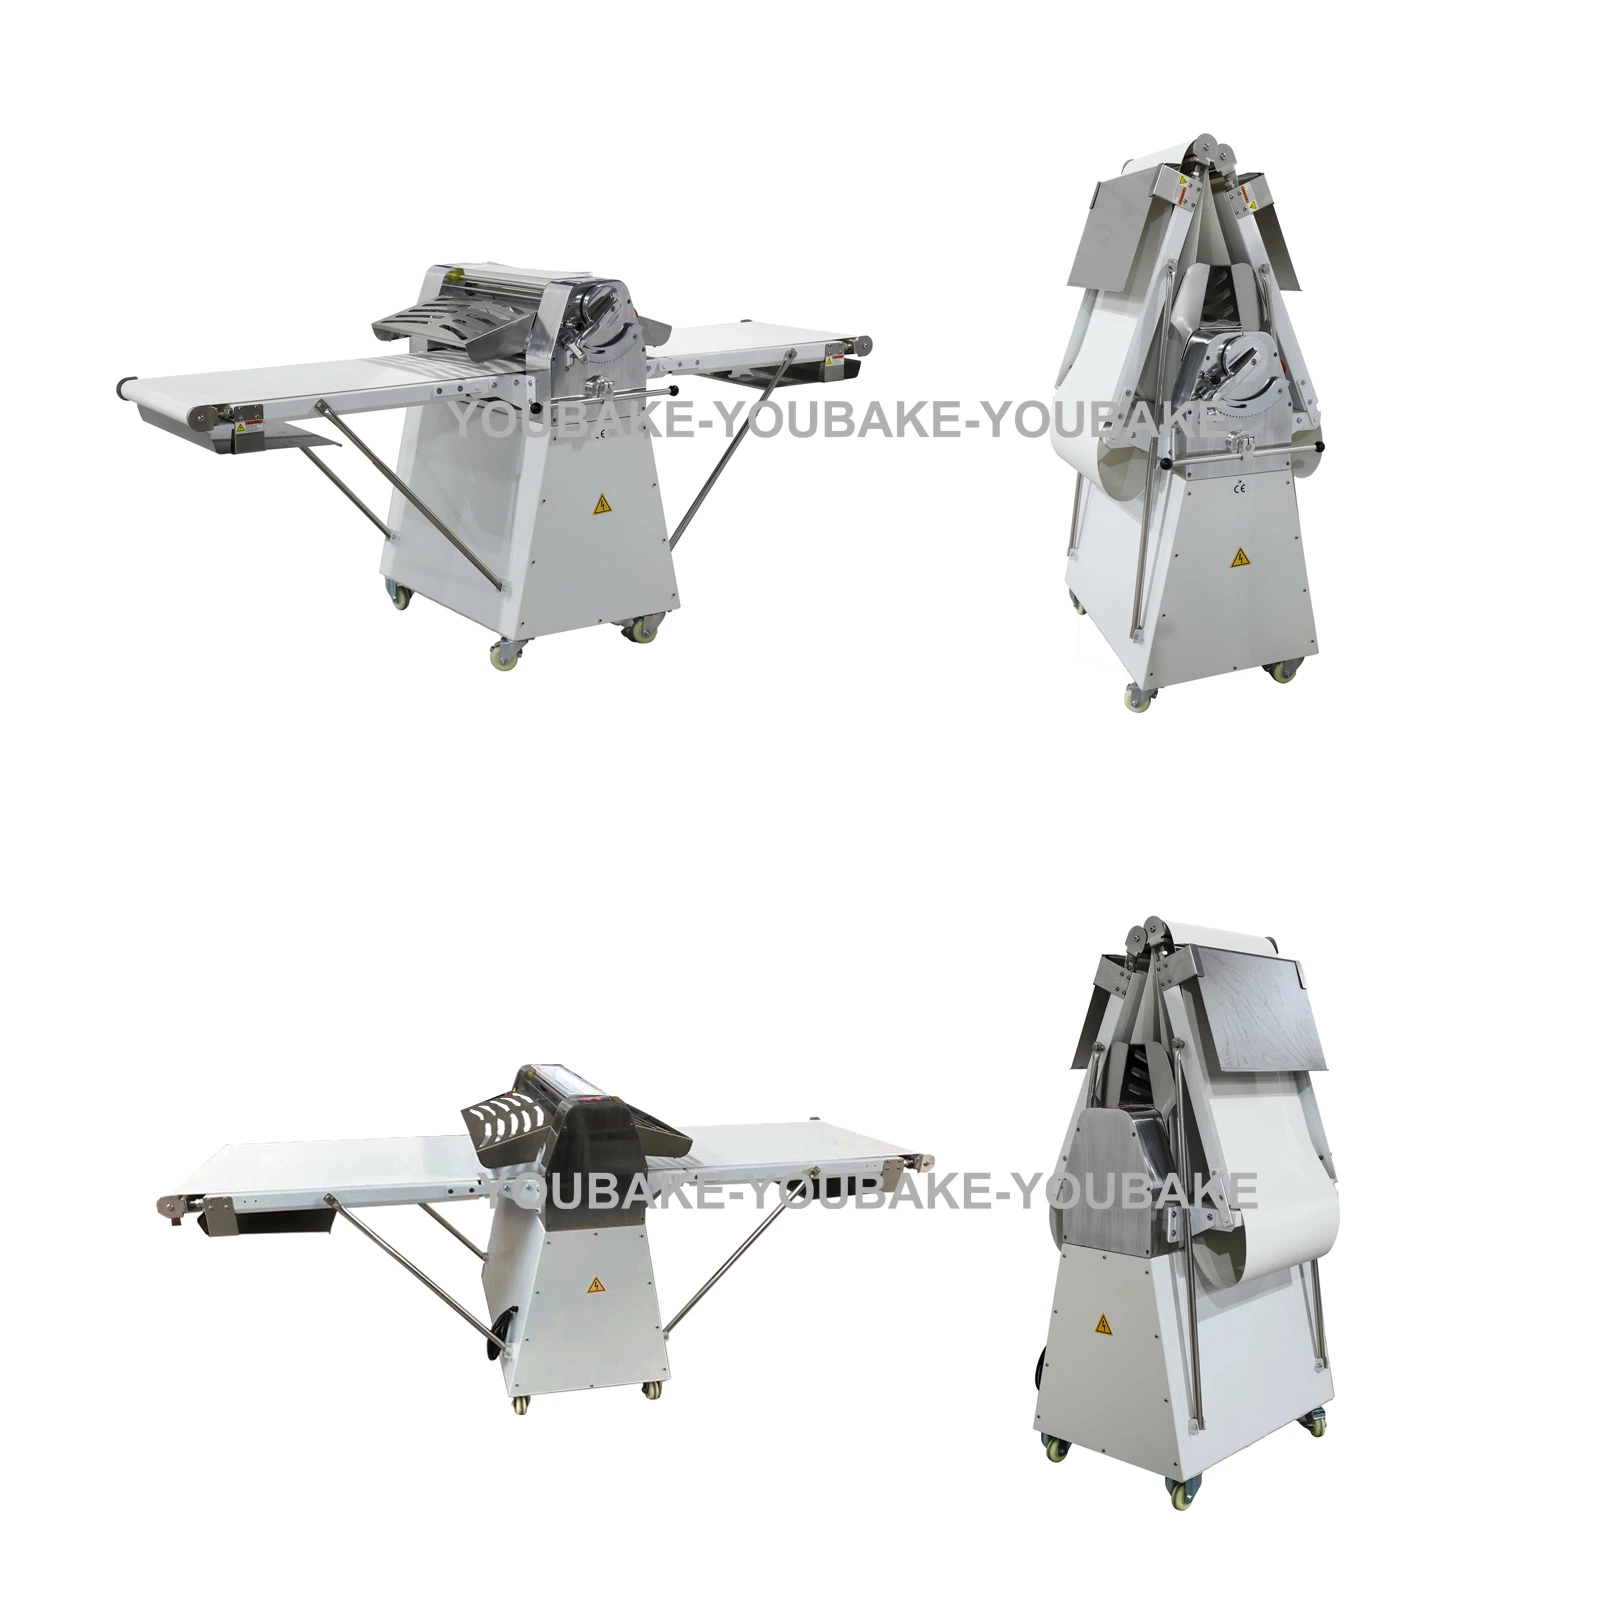 Price for Automatic Reversible Tabletop Stand Pizza Bread Croissant Pastry Dough Sheeter Machine Laminadora Roller Sheeter